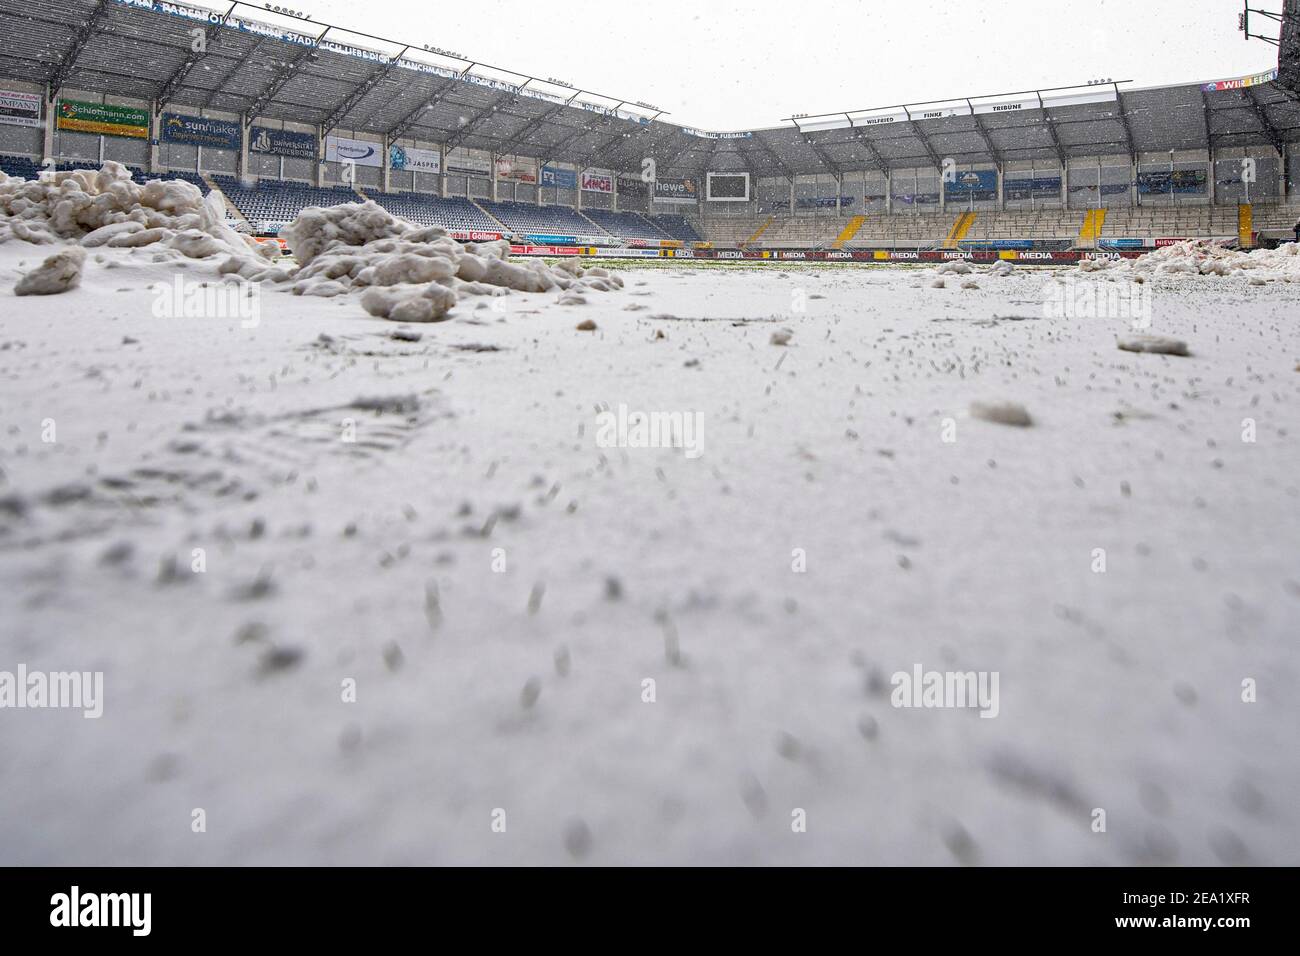 07 February 2021, North Rhine-Westphalia, Paderborn: Football: 2. Bundesliga, SC Paderborn 07 - 1. FC Heidenheim, Matchday 20, at Benteler-Arena. View into the empty stadium with snow-covered turf. Helpers had been clearing the pitch of snow since early morning. Due to the heavy snowfall, the match was nevertheless cancelled shortly before kick-off. Photo: David Inderlied/dpa - IMPORTANT NOTE: In accordance with the regulations of the DFL Deutsche Fußball Liga and/or the DFB Deutscher Fußball-Bund, it is prohibited to use or have used photographs taken in the stadium and/or of the match in the Stock Photo